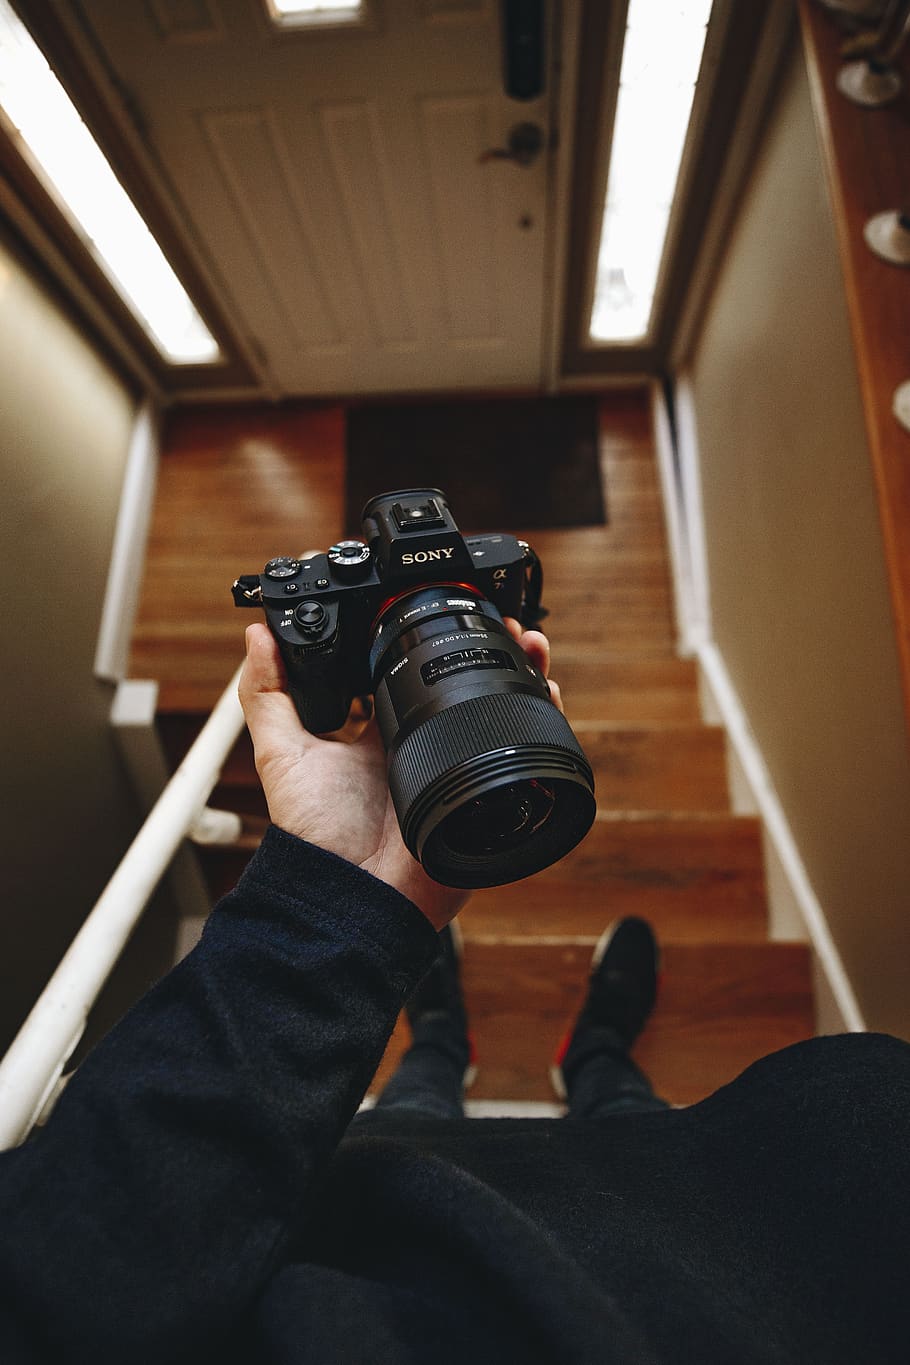 sony, dslr, camera, lens, black, photography, blur, stair, house, people